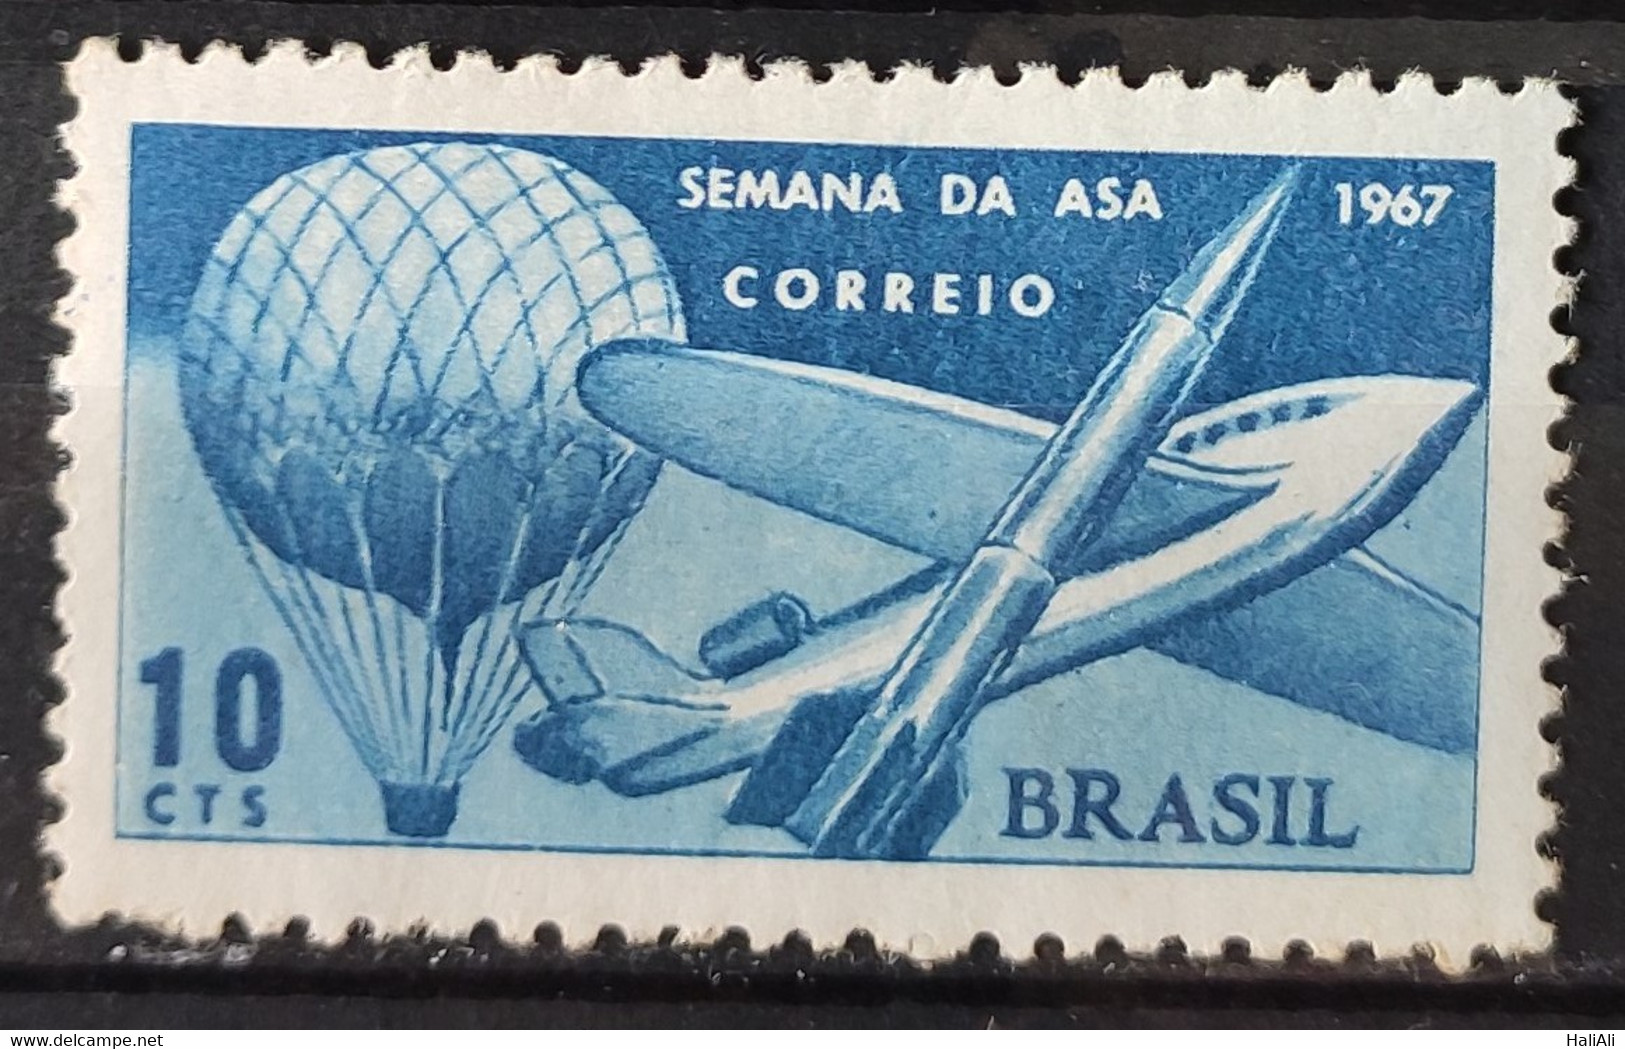 C 583 Brazil Stamp Week Wing Airplane Balao Rocket Aviacao 1967 1 - Other & Unclassified